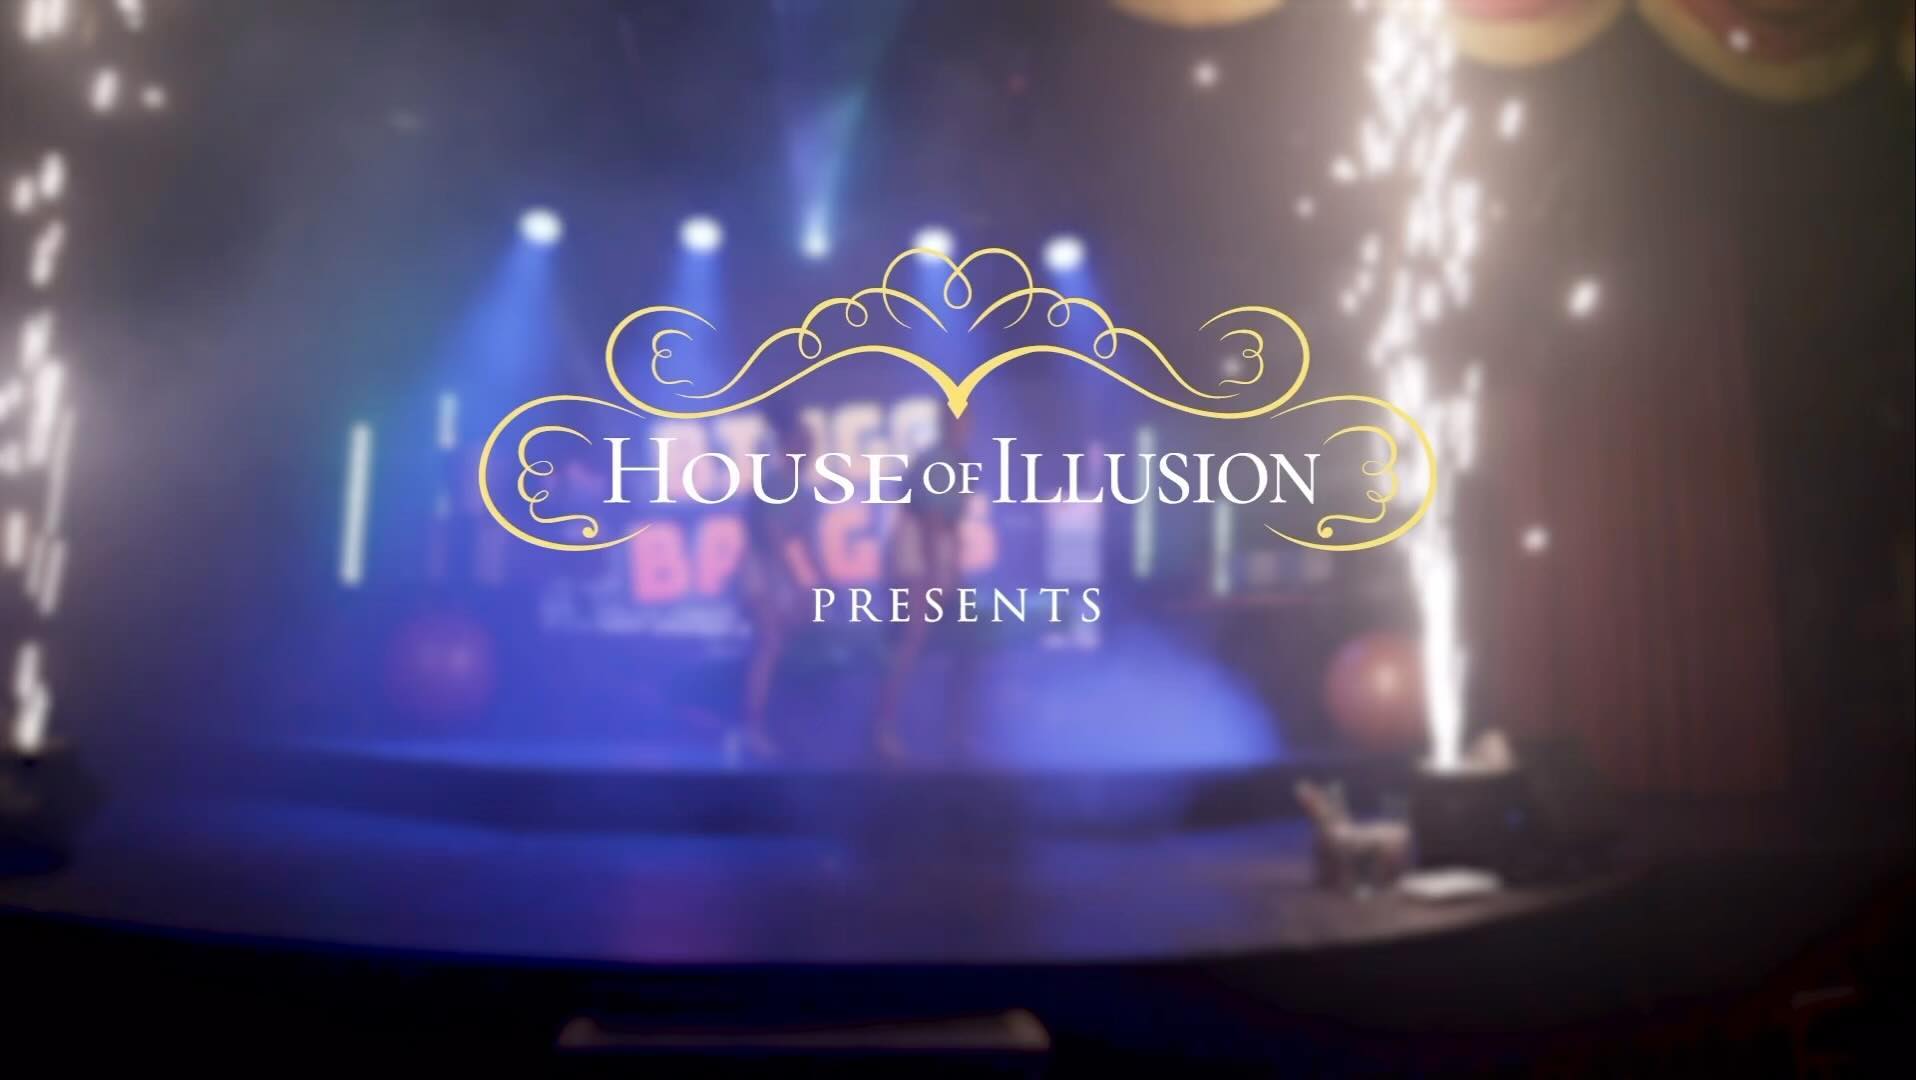 houseofillusion We have a new countdown And we are sooooooo houseofillusion We have a new countdown!!
And we are sooooooo...